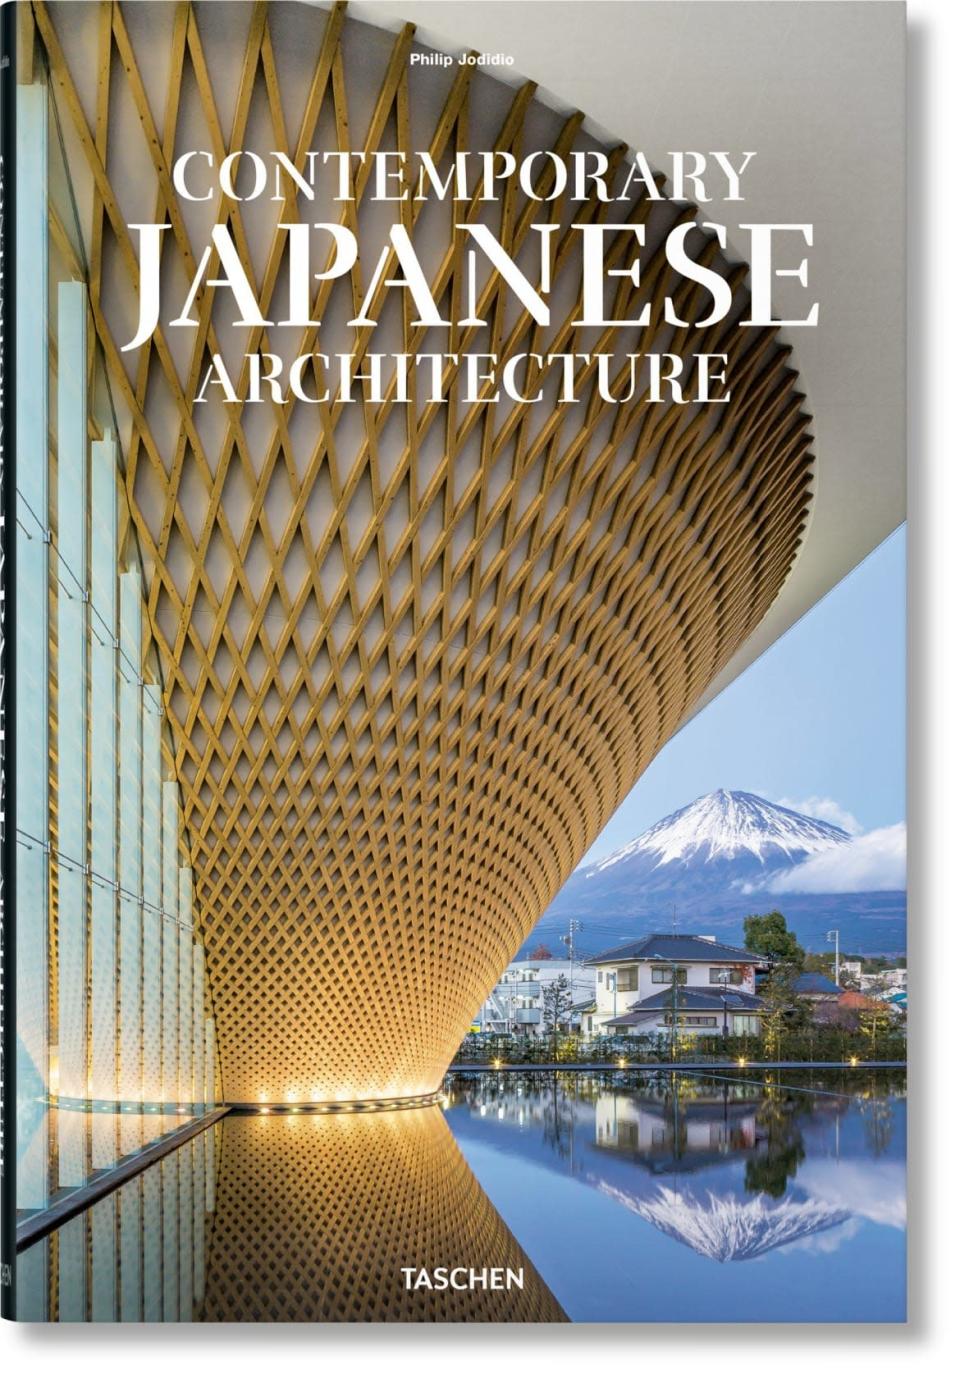 <div class="inline-image__caption"><p><strong><em>Contemporary Japanese Architecture, edited by Philip Jodidio</em></strong></p></div> <div class="inline-image__credit">Taschen</div>